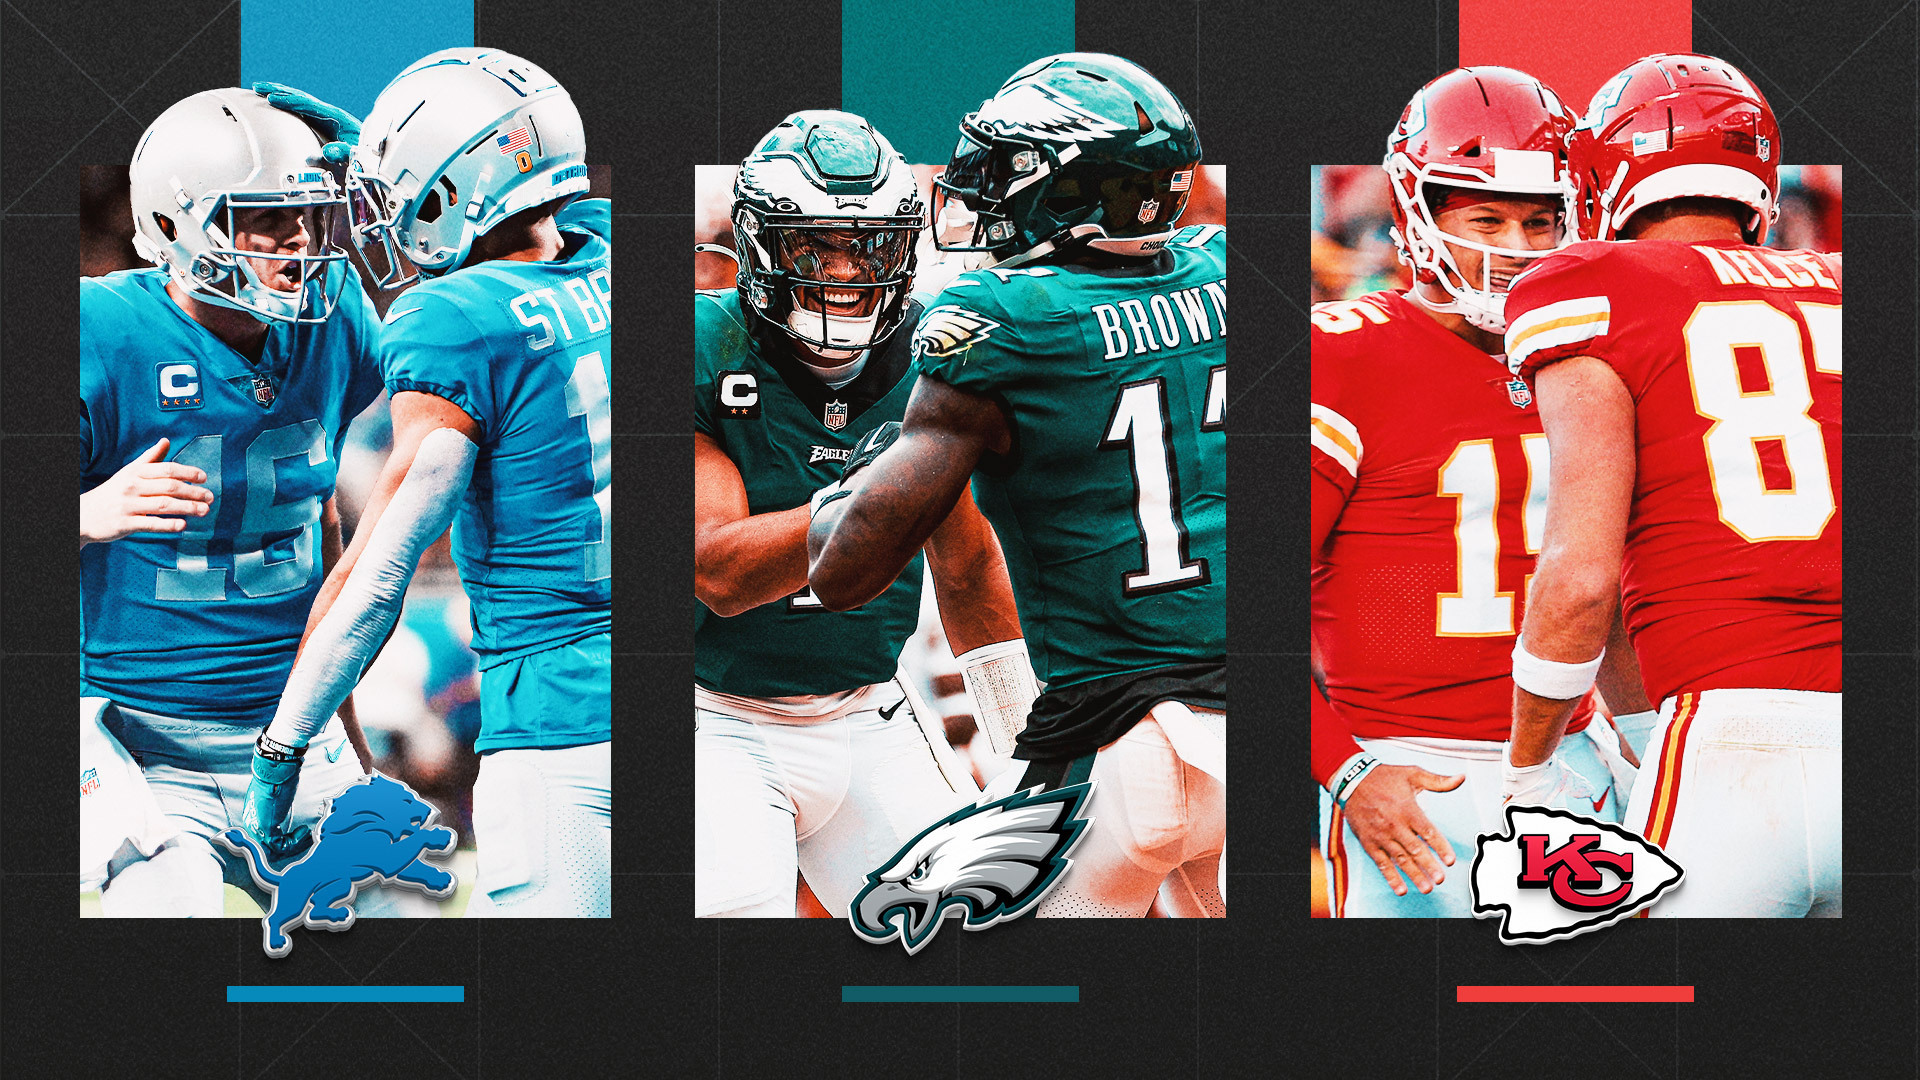 Top 5 NFL Offenses for 2023 Season: Which Teams Made the Cut?